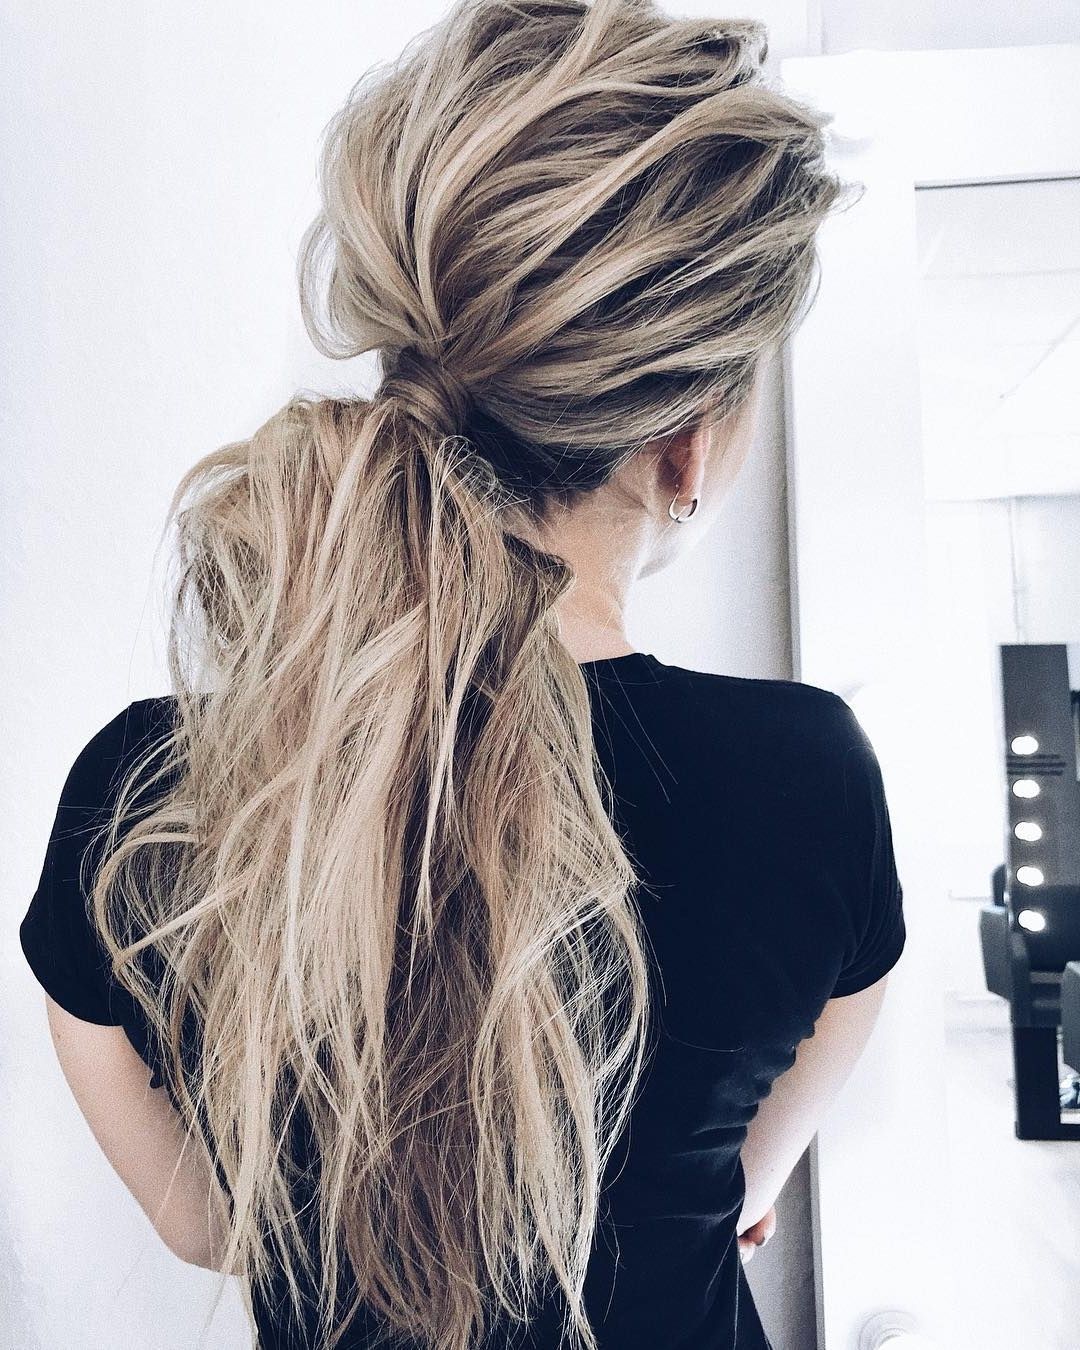 10 Creative Ponytail Hairstyles For Long Hair, Summer Hairstyle With Regard To Fashionable Chic Ponytail Hairstyles With Added Volume (View 18 of 20)